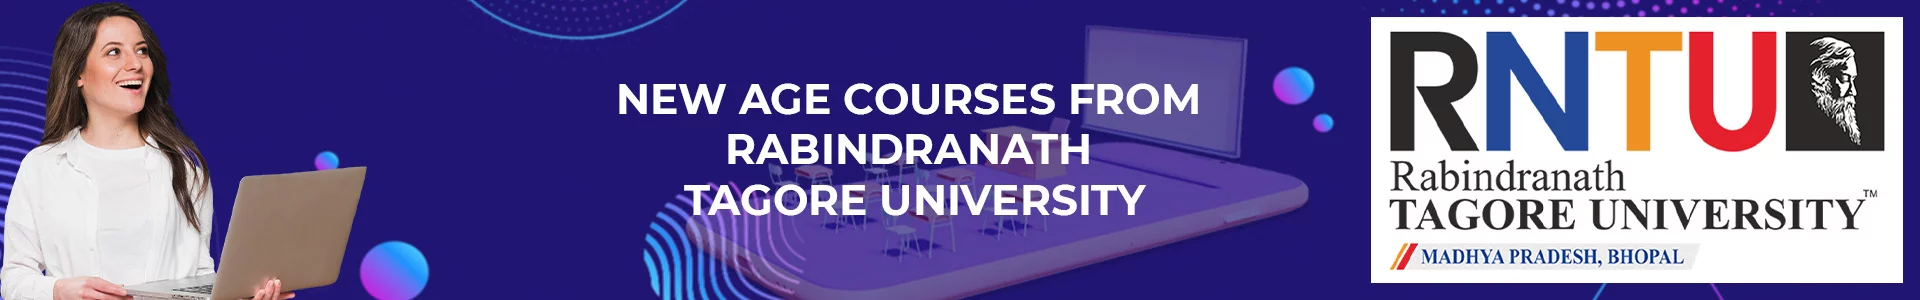 RNTU new age courses from Rabindranath Tagore University